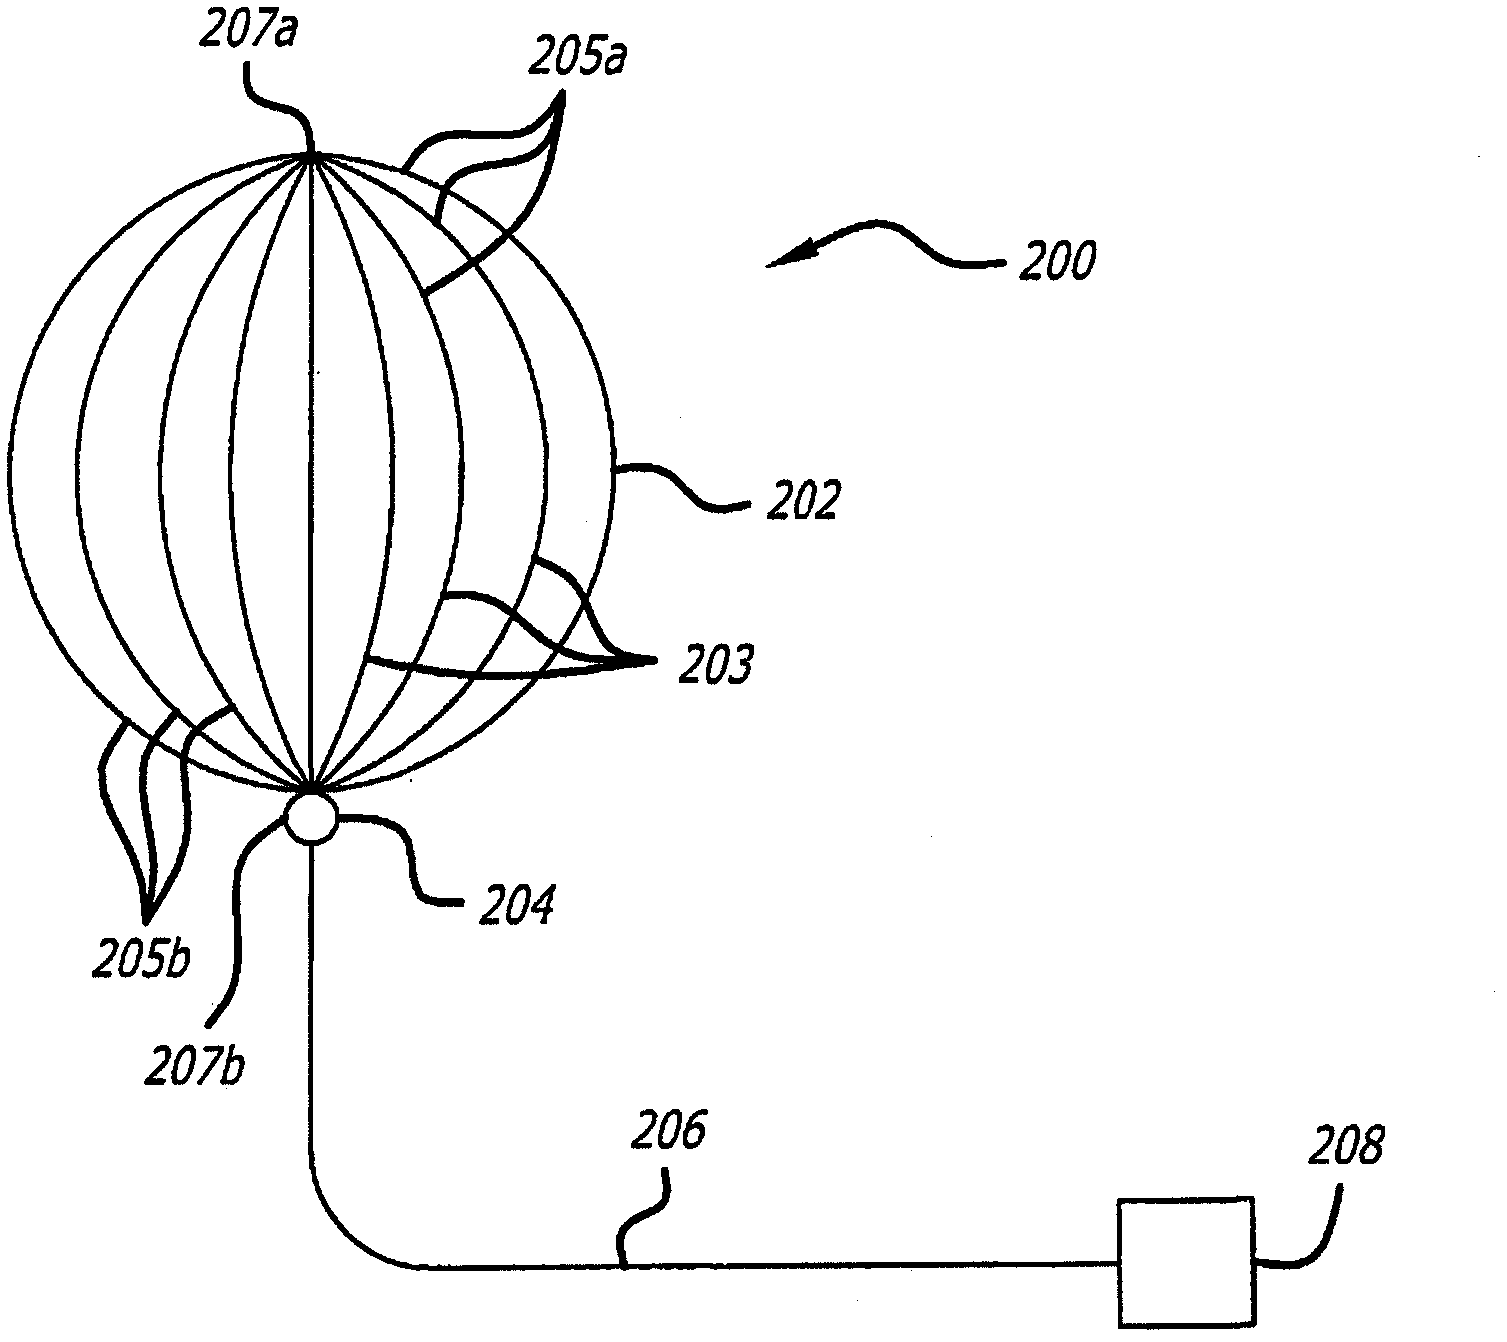 Self-expandable aneurysm filling device and system